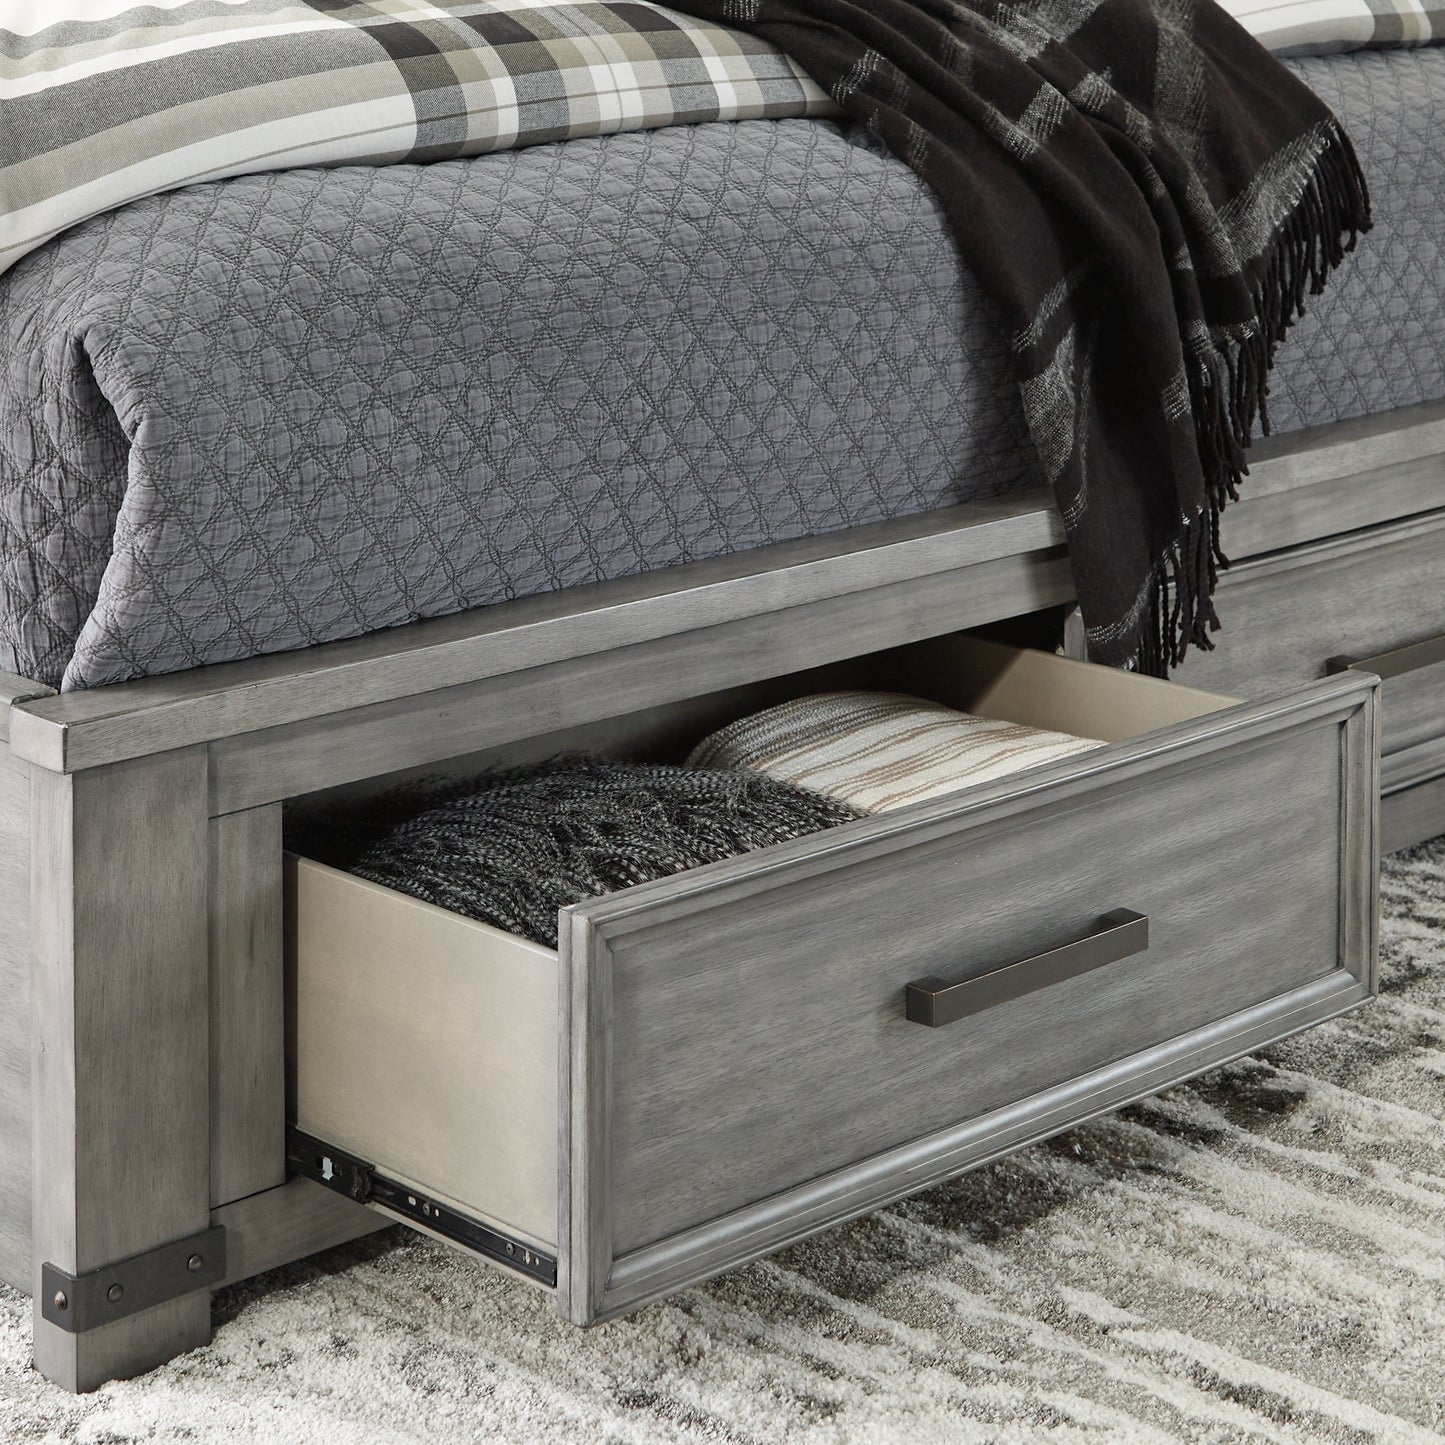 Ashley Express - Russelyn Queen Storage Bed